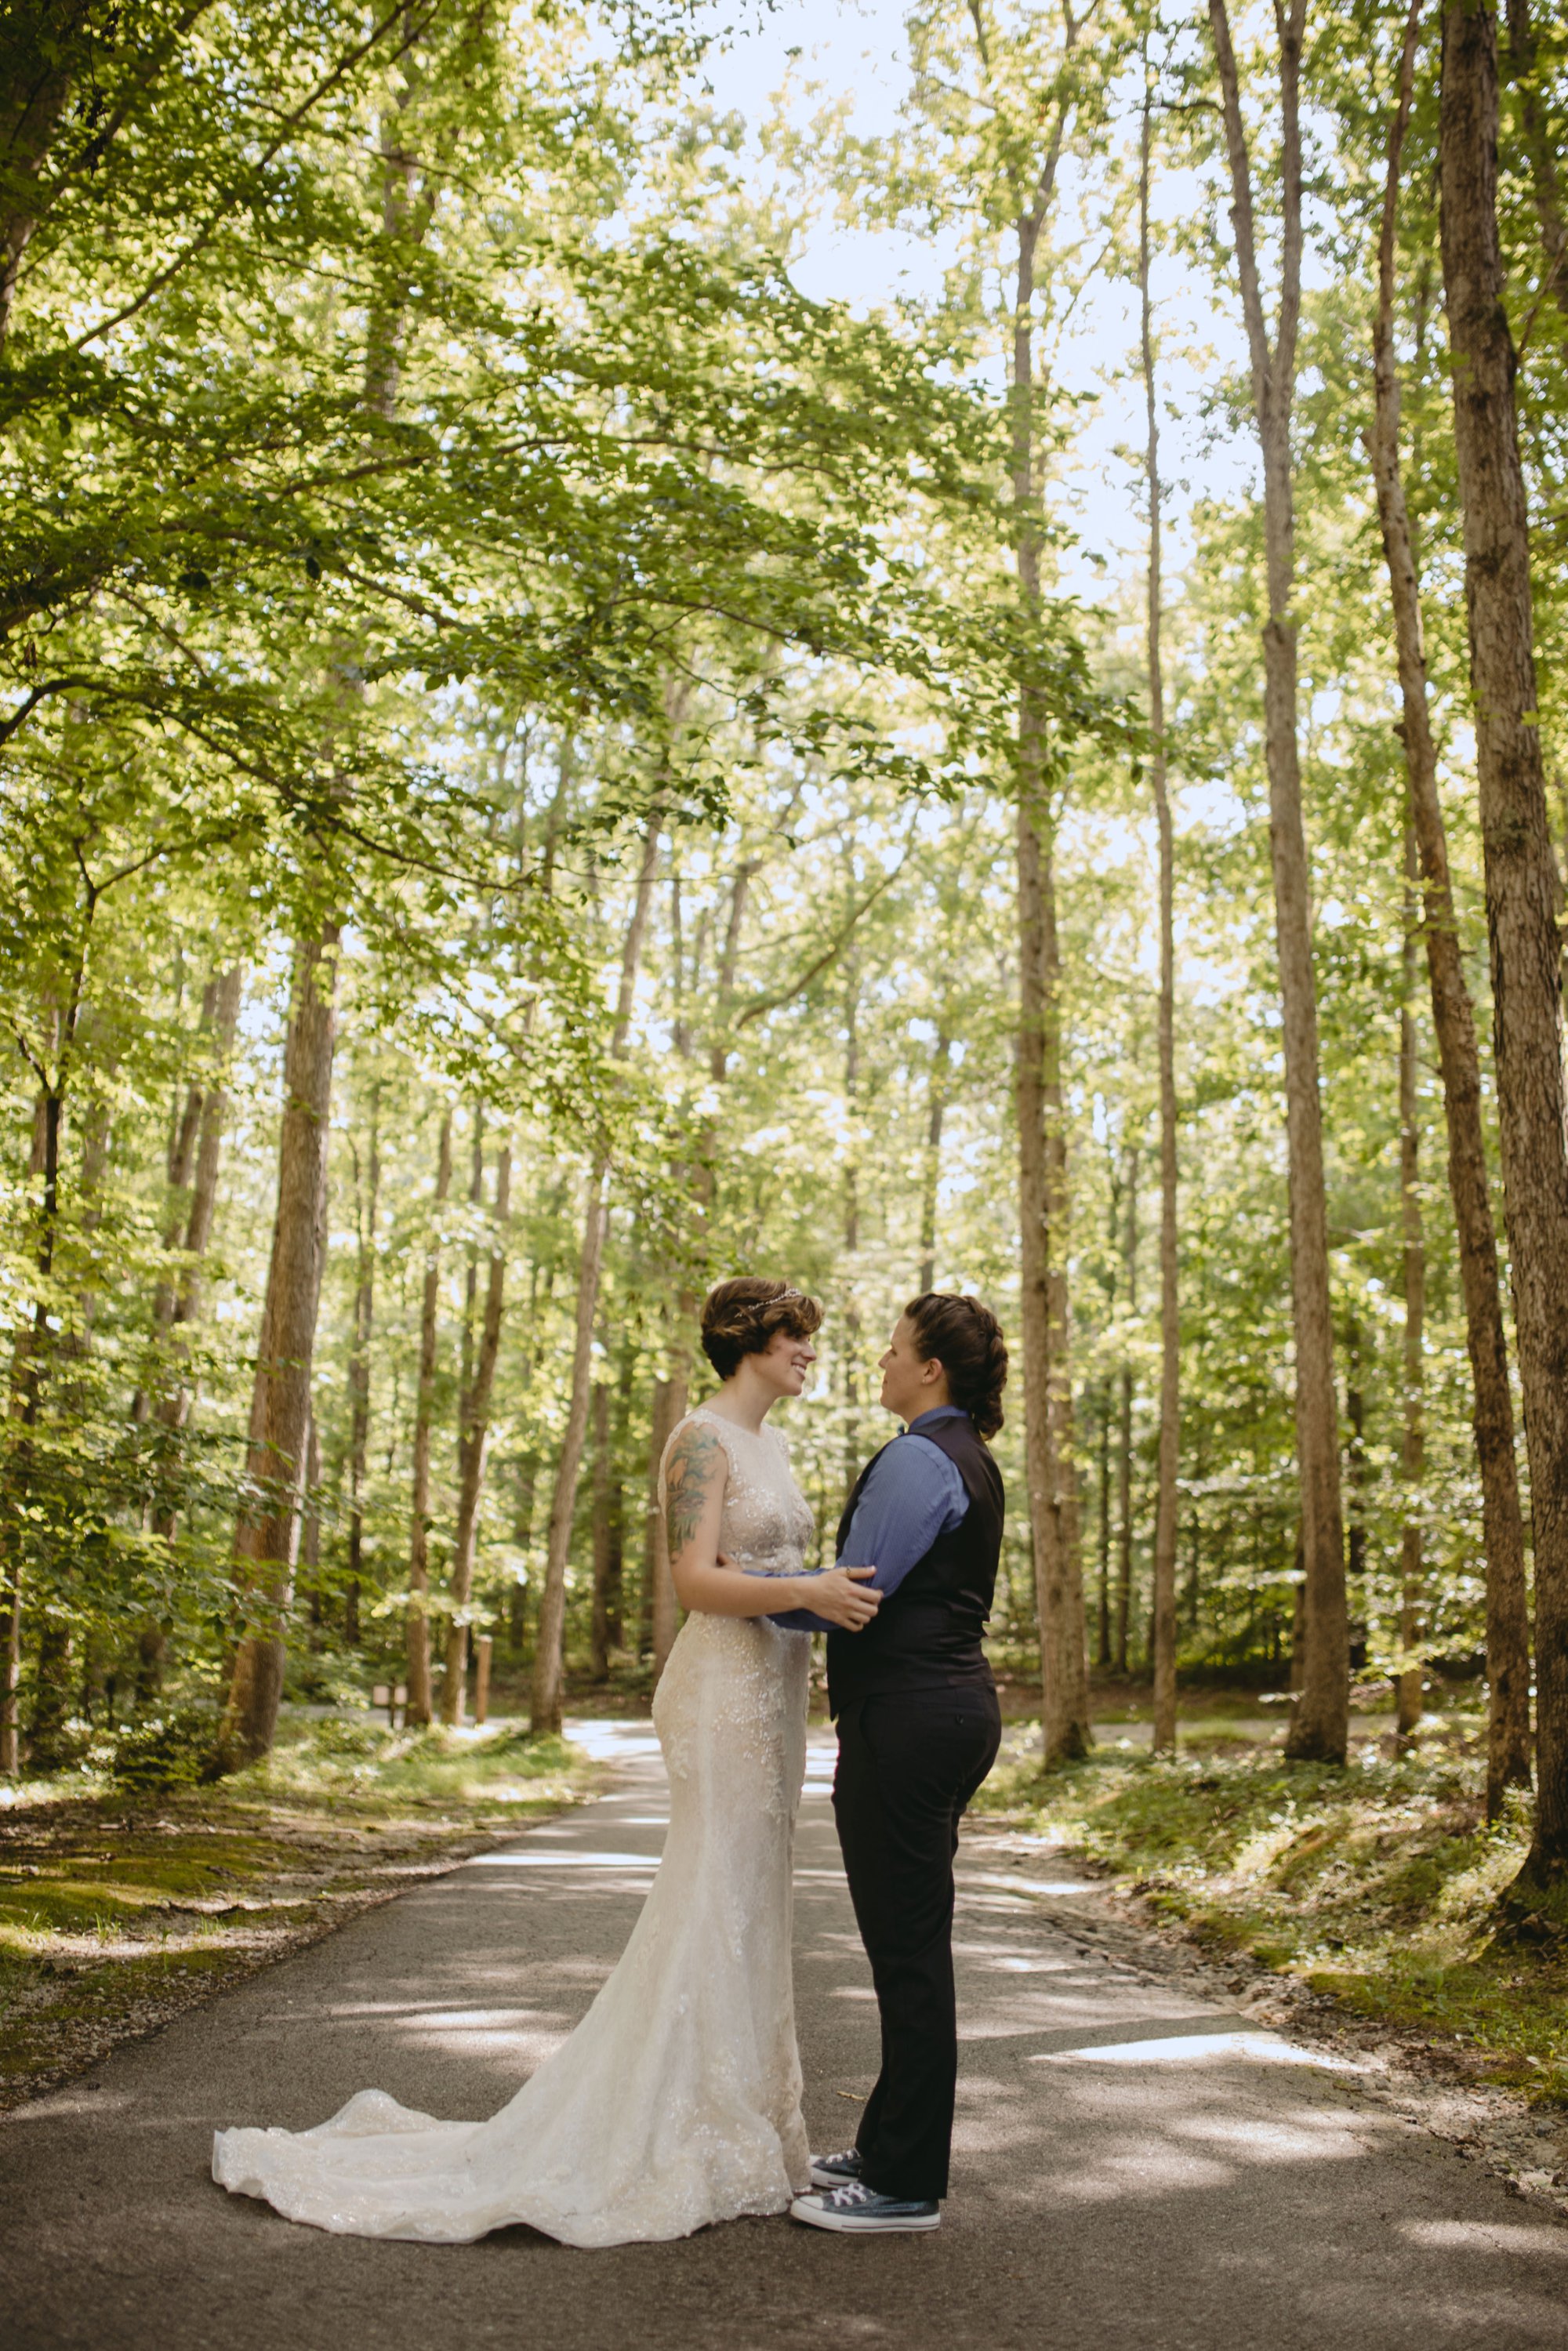 Richmond Va same-sex wedding in pocahontas state park with a simple ceremony. Forest portrait.